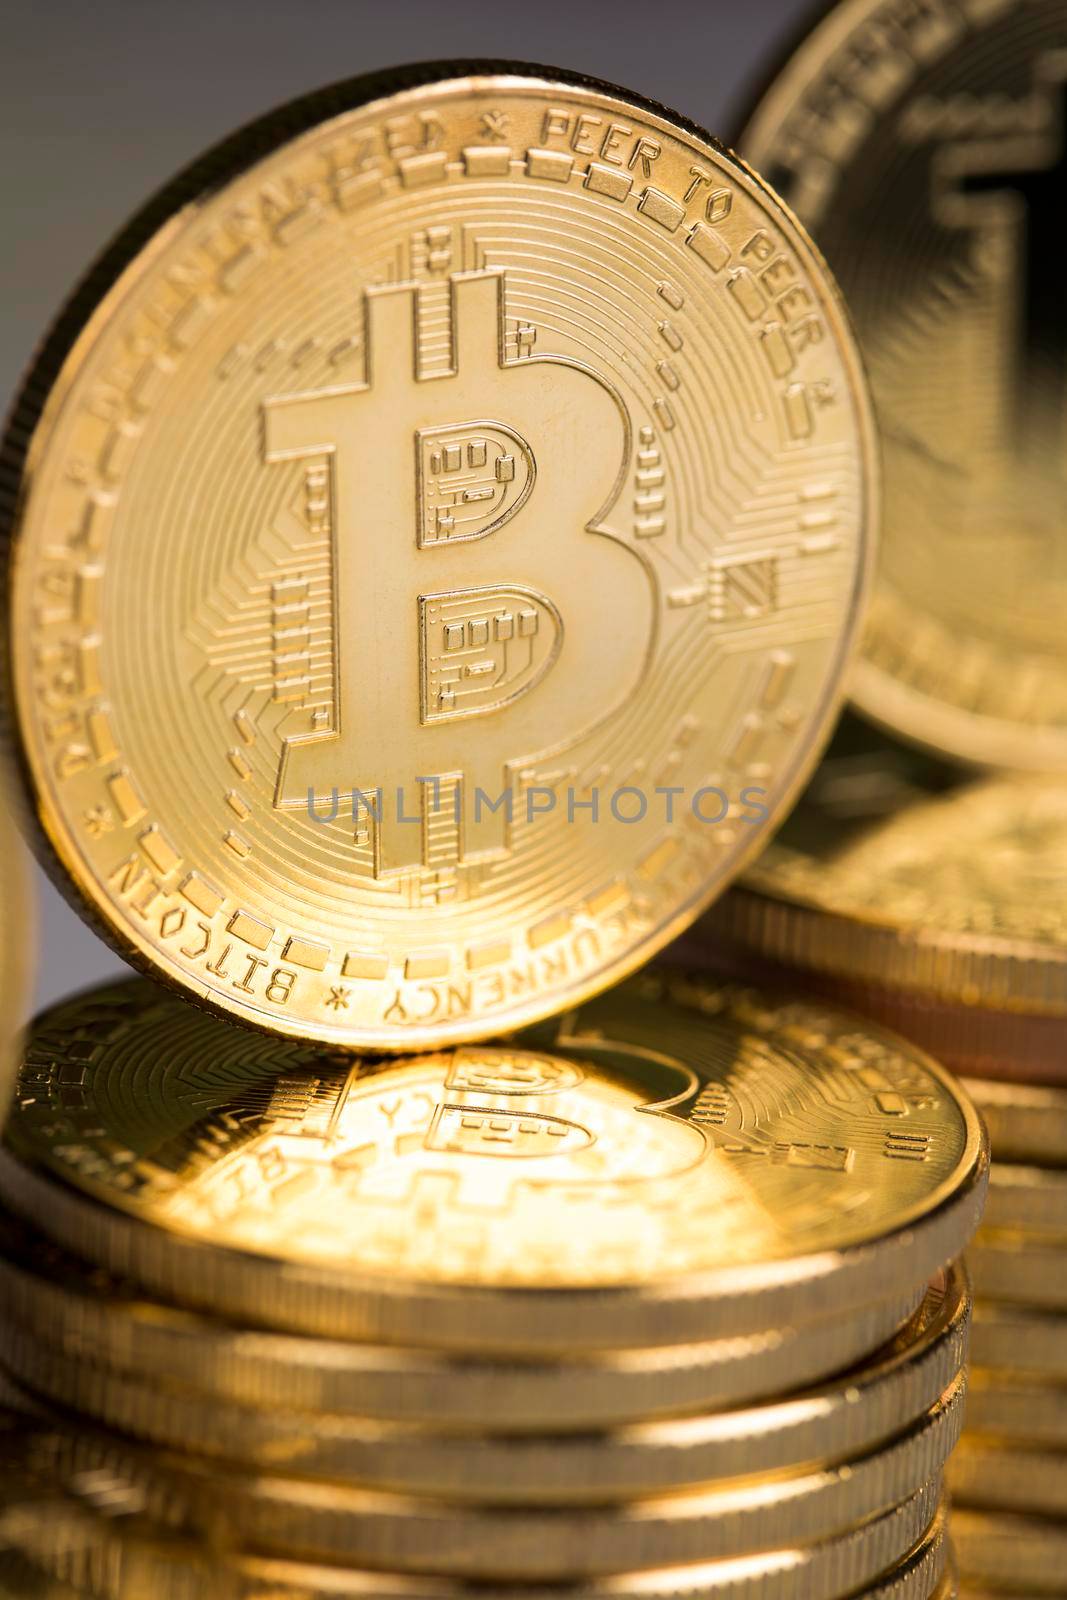 Gold Bitcoin Coin. Buisness and financial background